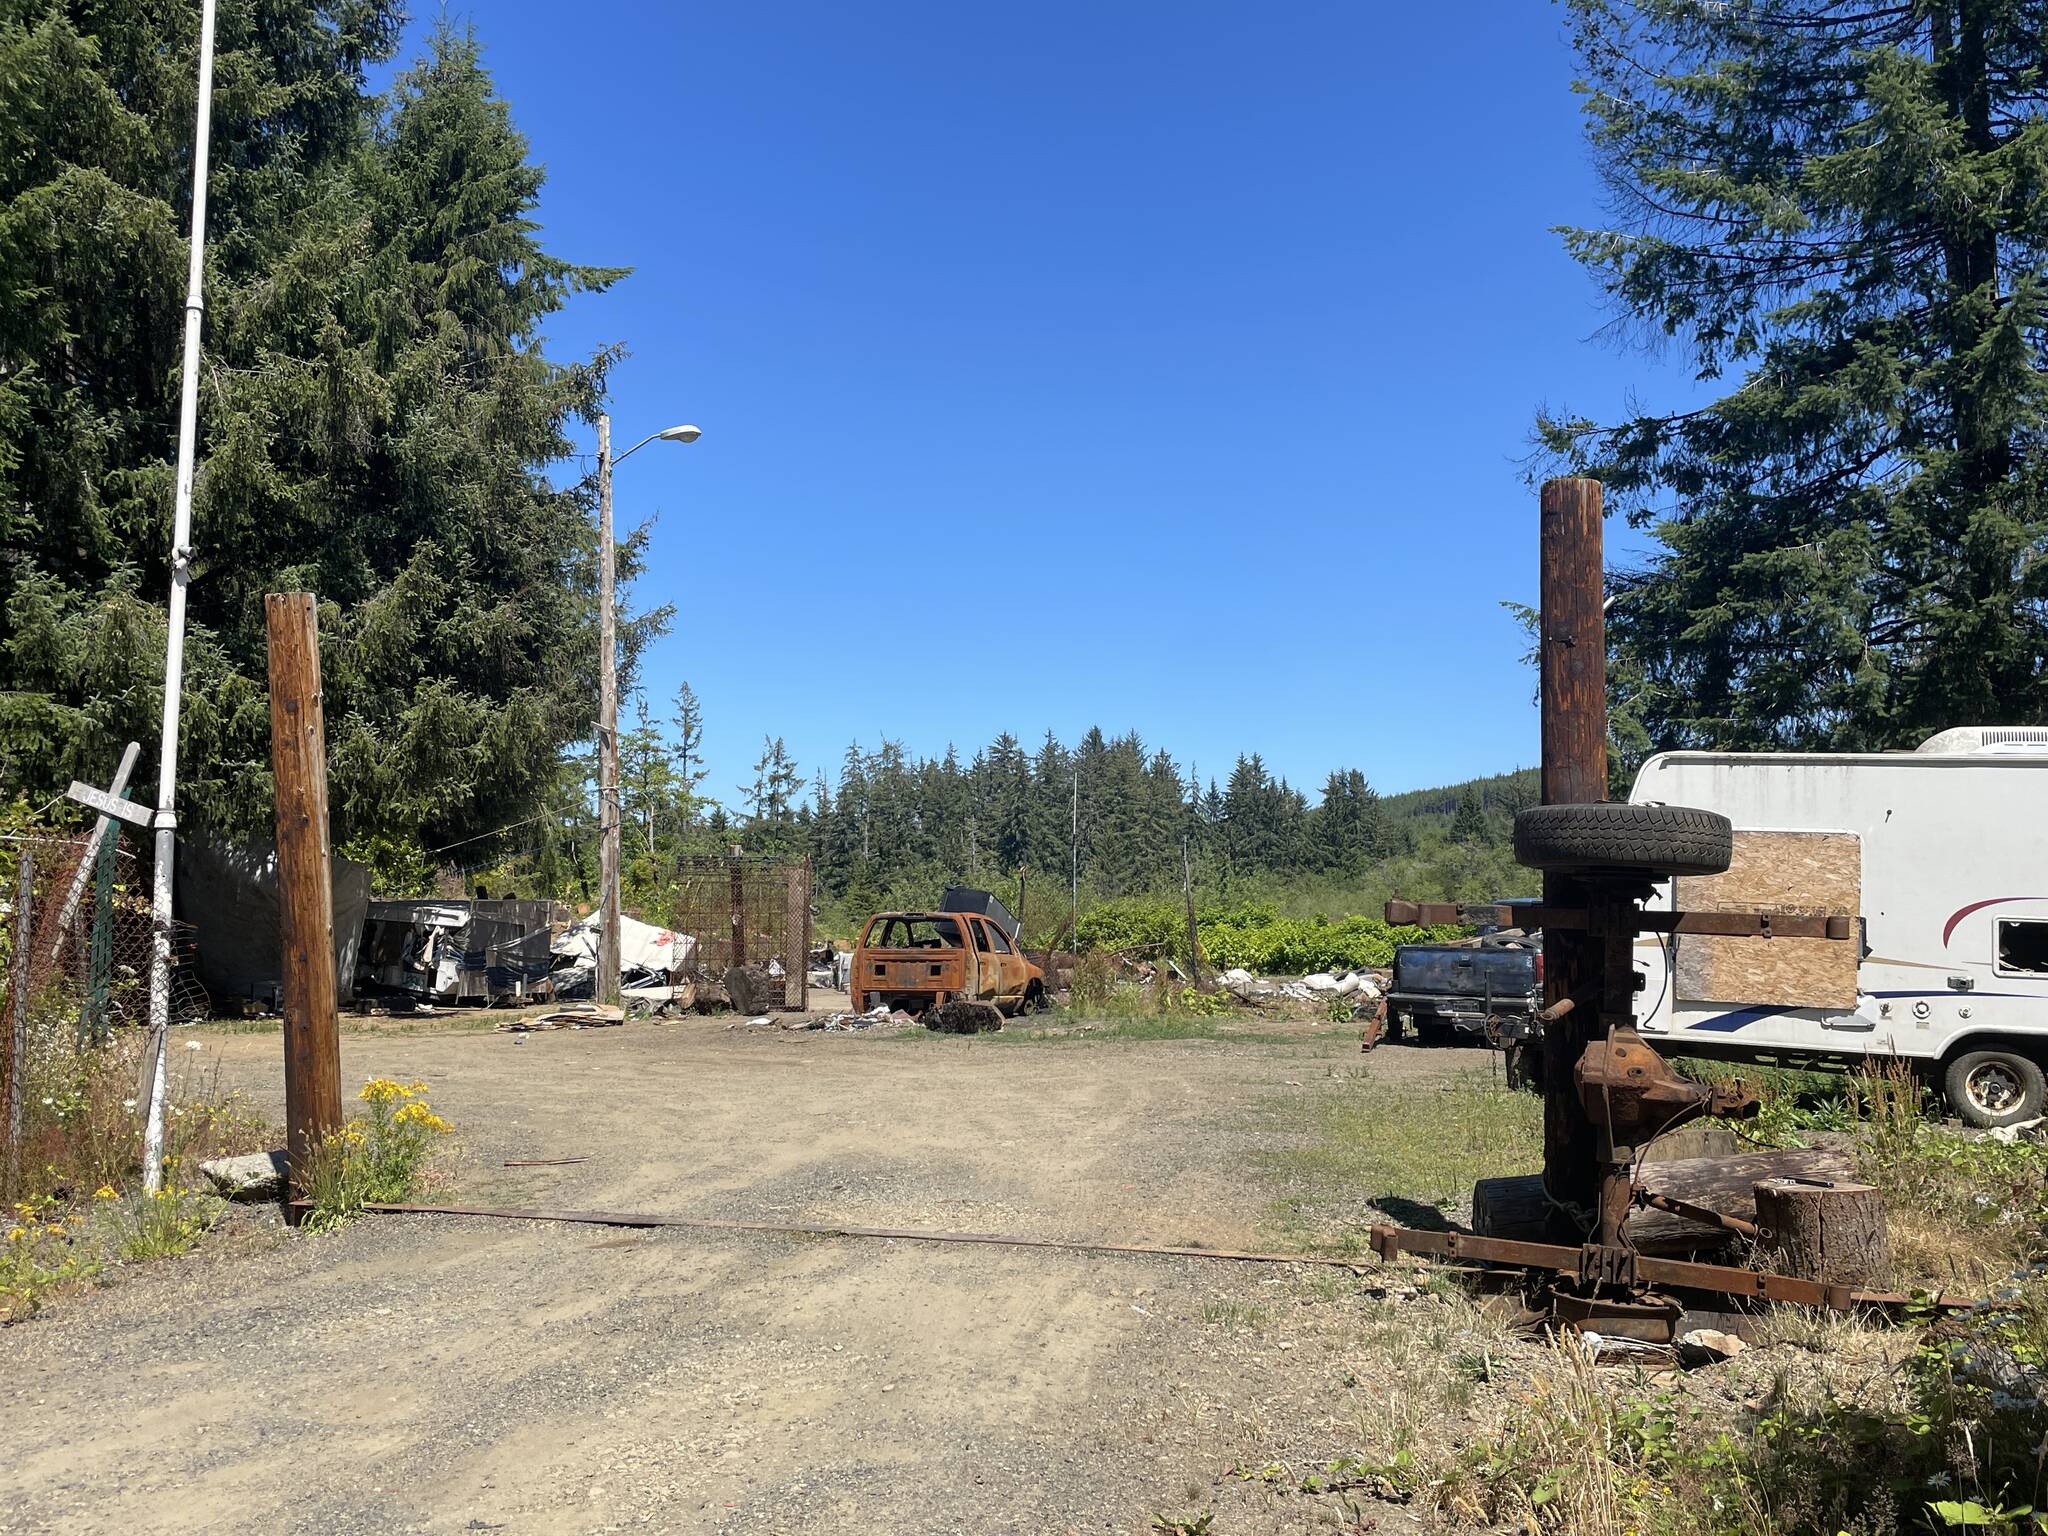 A derelict property was the site a of a trailer fire earlier in the week that completely destroyed a truck camper. (Michael S. Lockett / The Daily World)